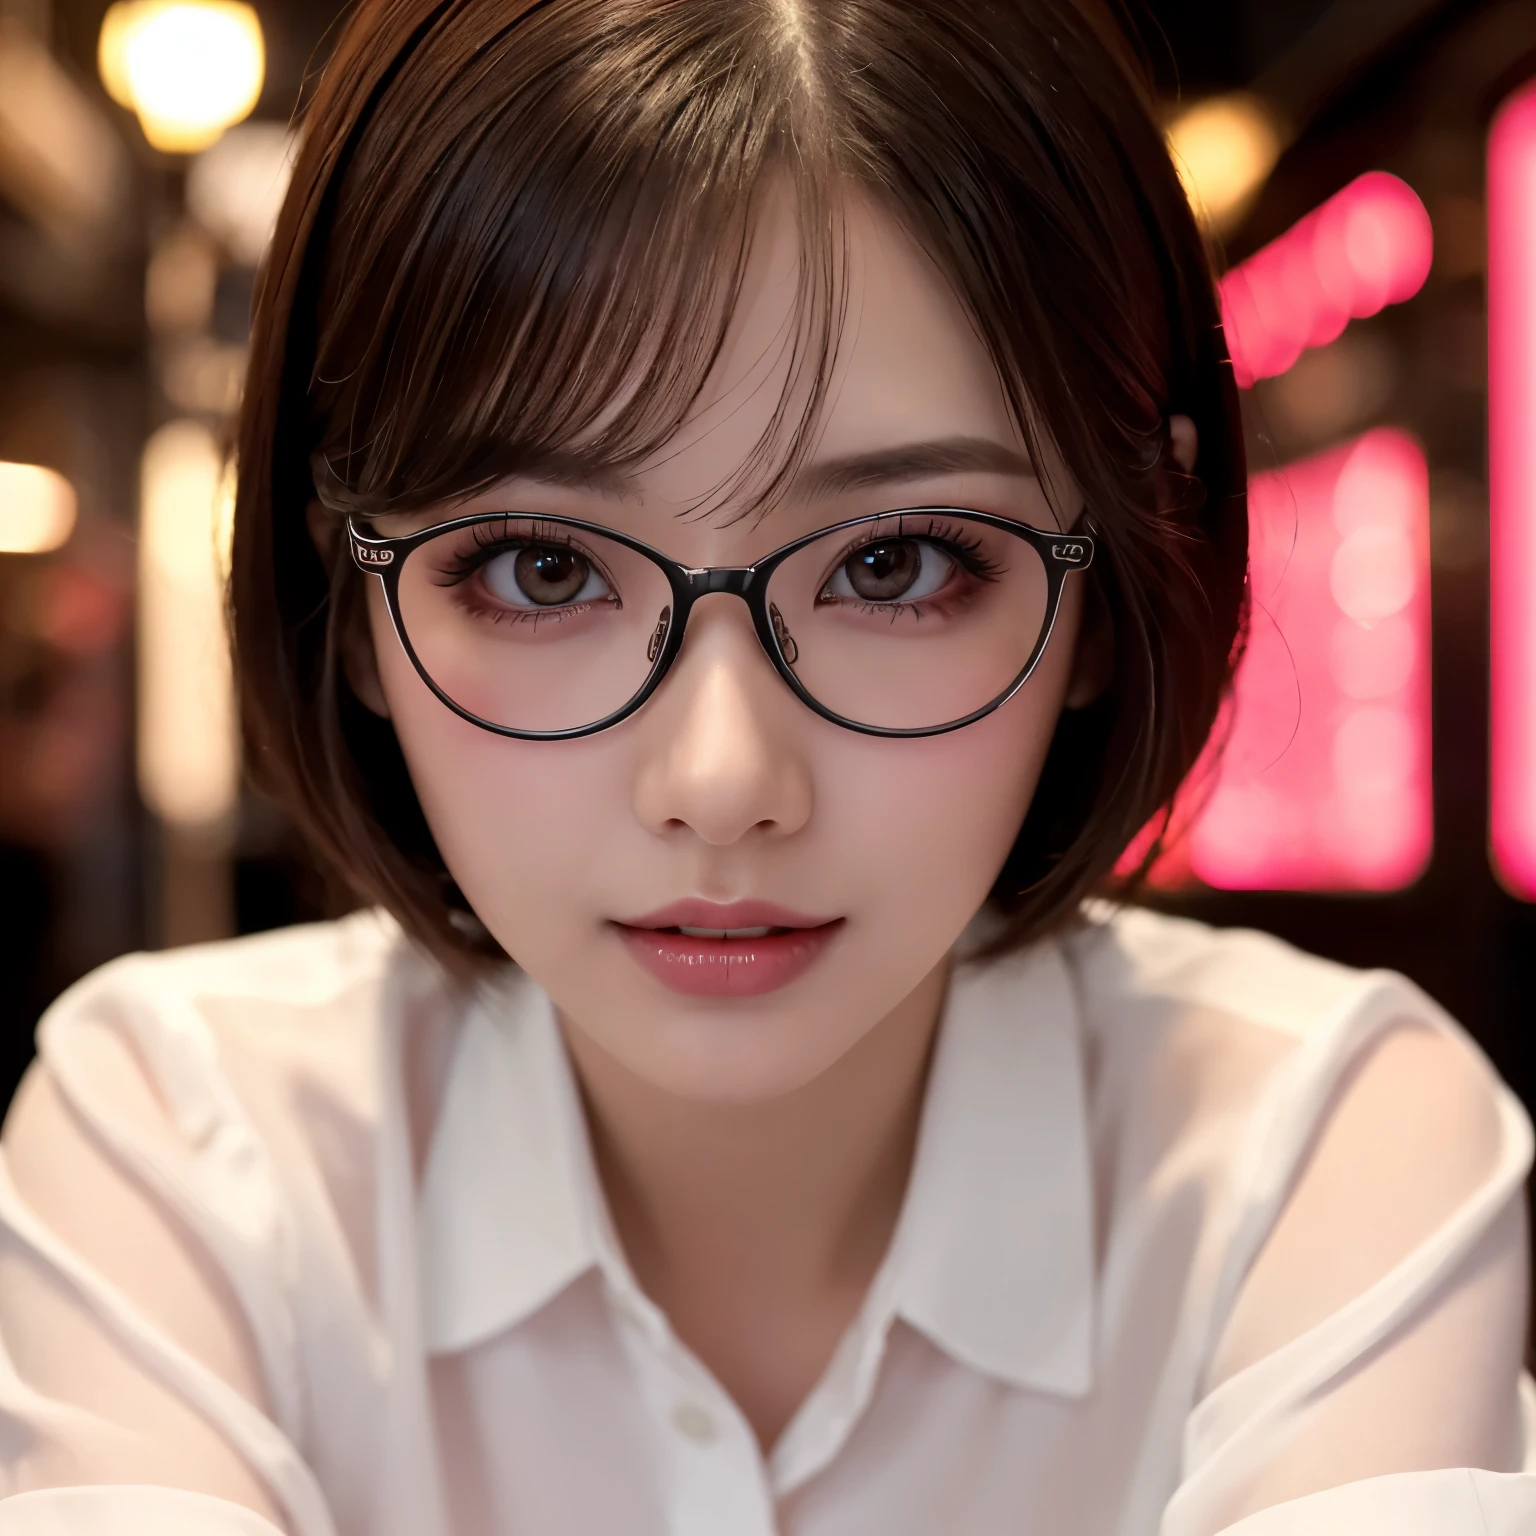 (highest quality、table top、8k、best image quality、Award-winning work)、one beautiful woman、25 years old、perfect beautiful composition、(very short straight hair:1.1)、(Classy glasses:1.1)、(perfect and precise white blouse:1.3)、look at me、perfect makeup、Bewitching、Overflowing sex appeal、glossy and bright lips、accurate anatomy、(close up of face:1.6)、look at me、(the moodiest lighting:1.1)、(Blurred red light district background with a moody and romantic atmosphere:1.1)、perfect makeup、Ultra high definition beauty face、ultra high definition hair、Ultra high definition moist eyes、(Super high resolution perfect teeth:1.1)、(Super high resolution glossy skin:1.1)、Super high resolution glossy lips